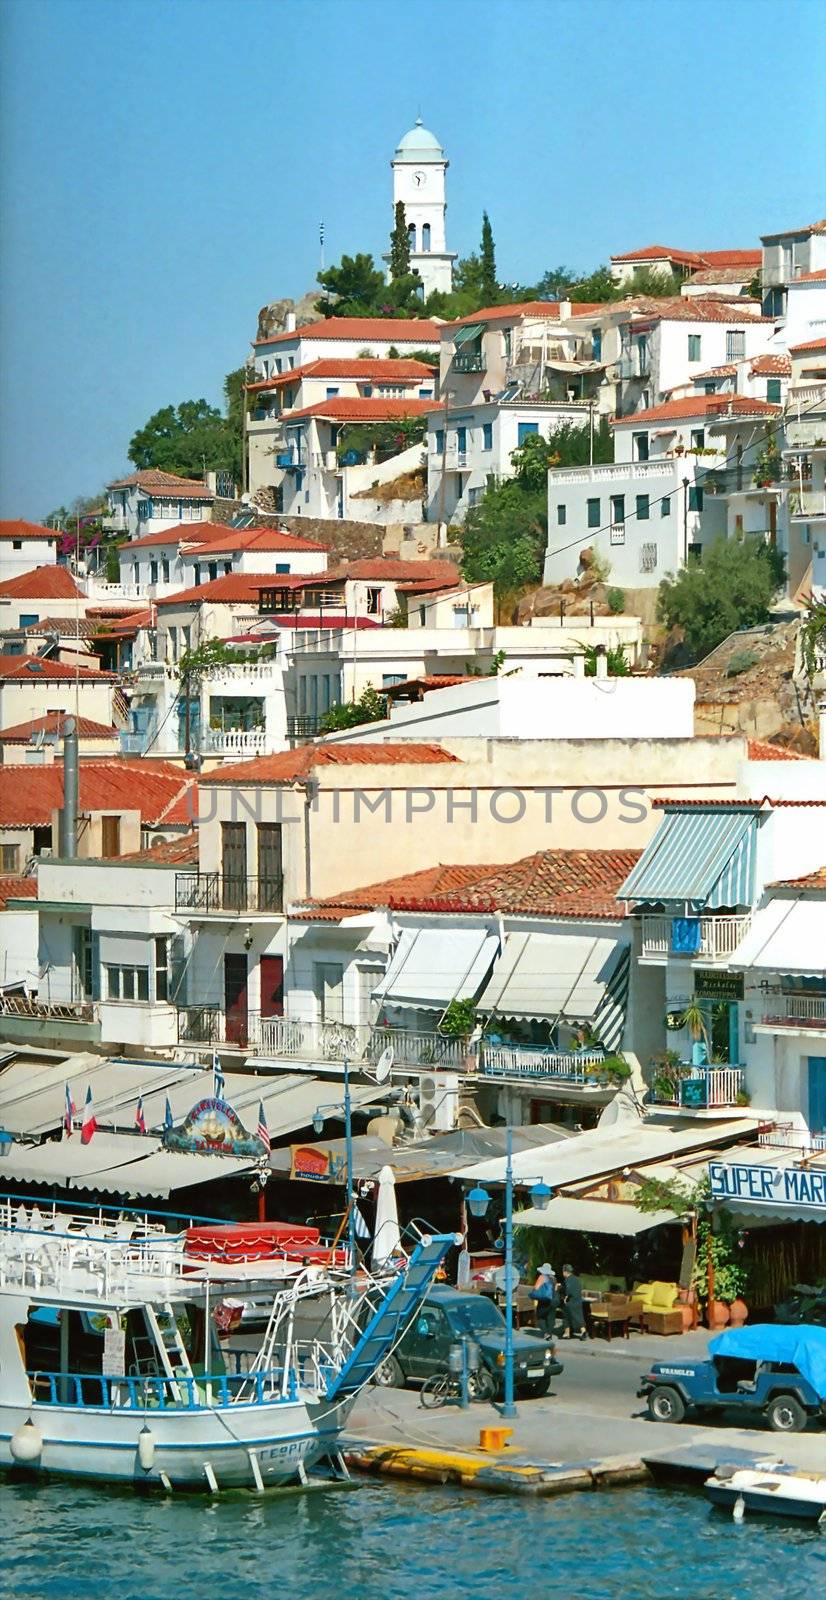 View of clock tower and picturesque greek town